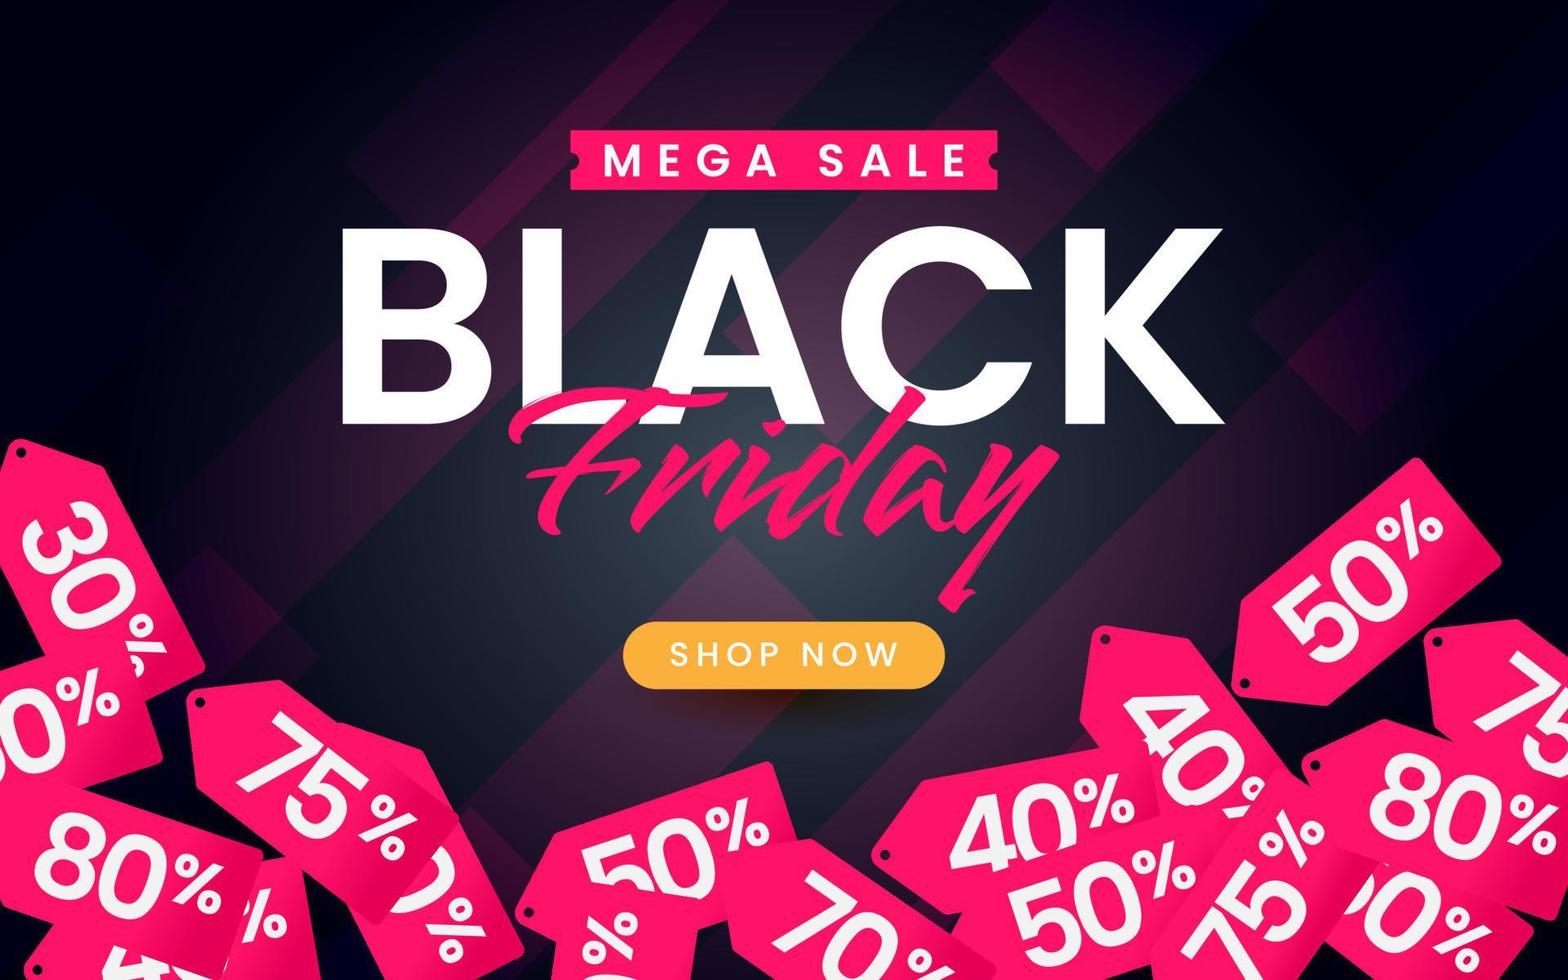 Black Friday Sale banner template, Abstract Sale background vector